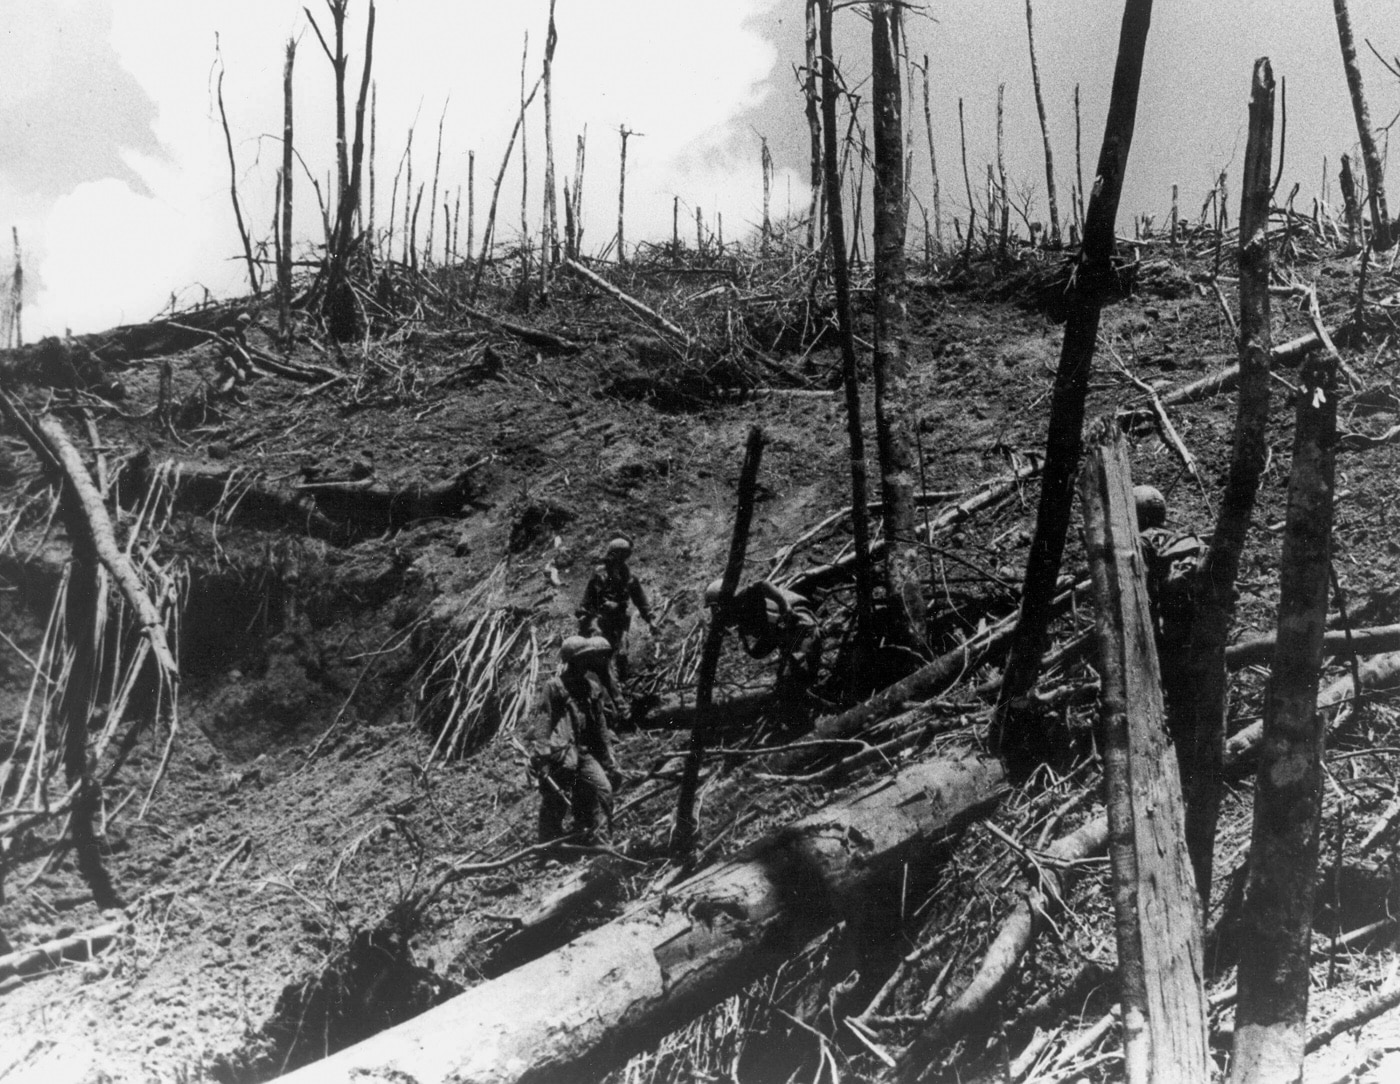 In this photo, we see United States Army soldiers on Hamburger Hill inspecting the damage done to Hamburger Hill during Operation Apache Snow in 1969.